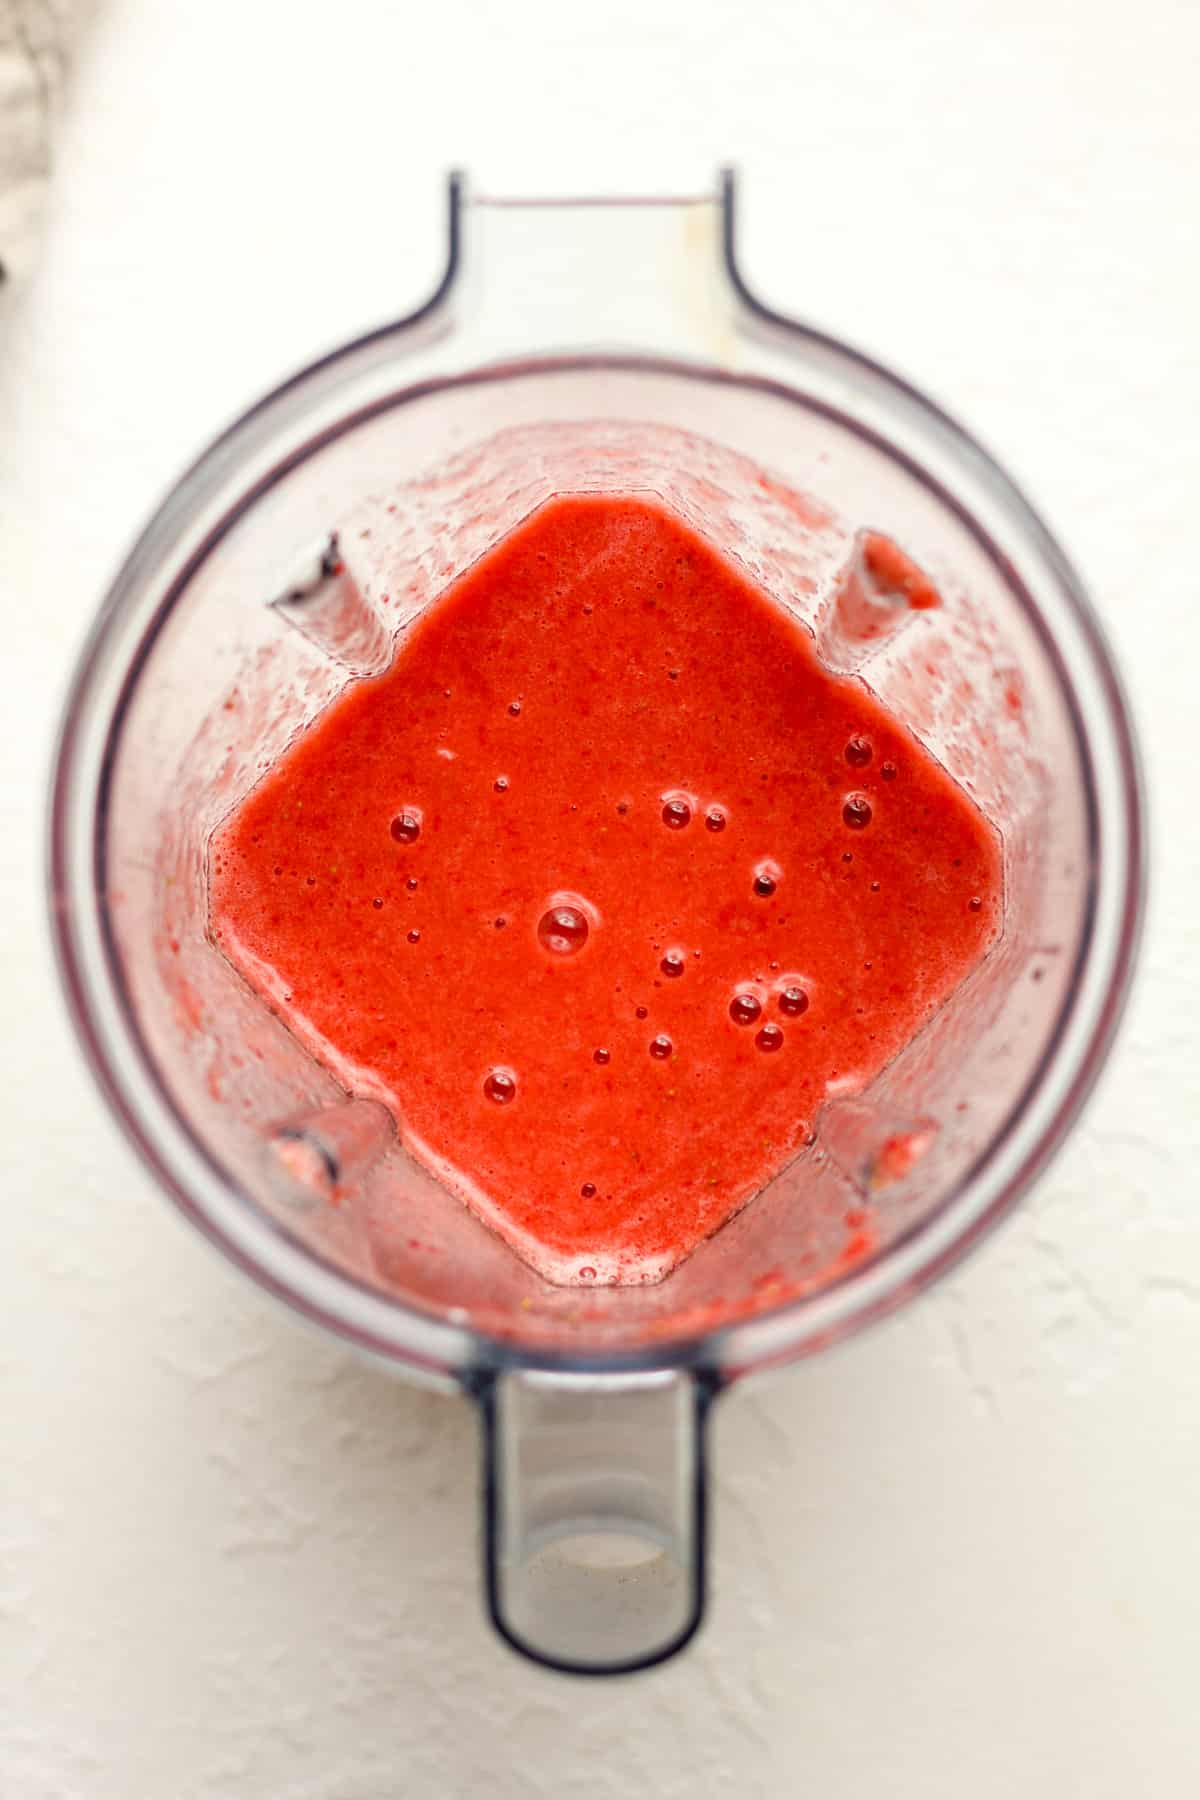 A blender of the pureed strawberries.